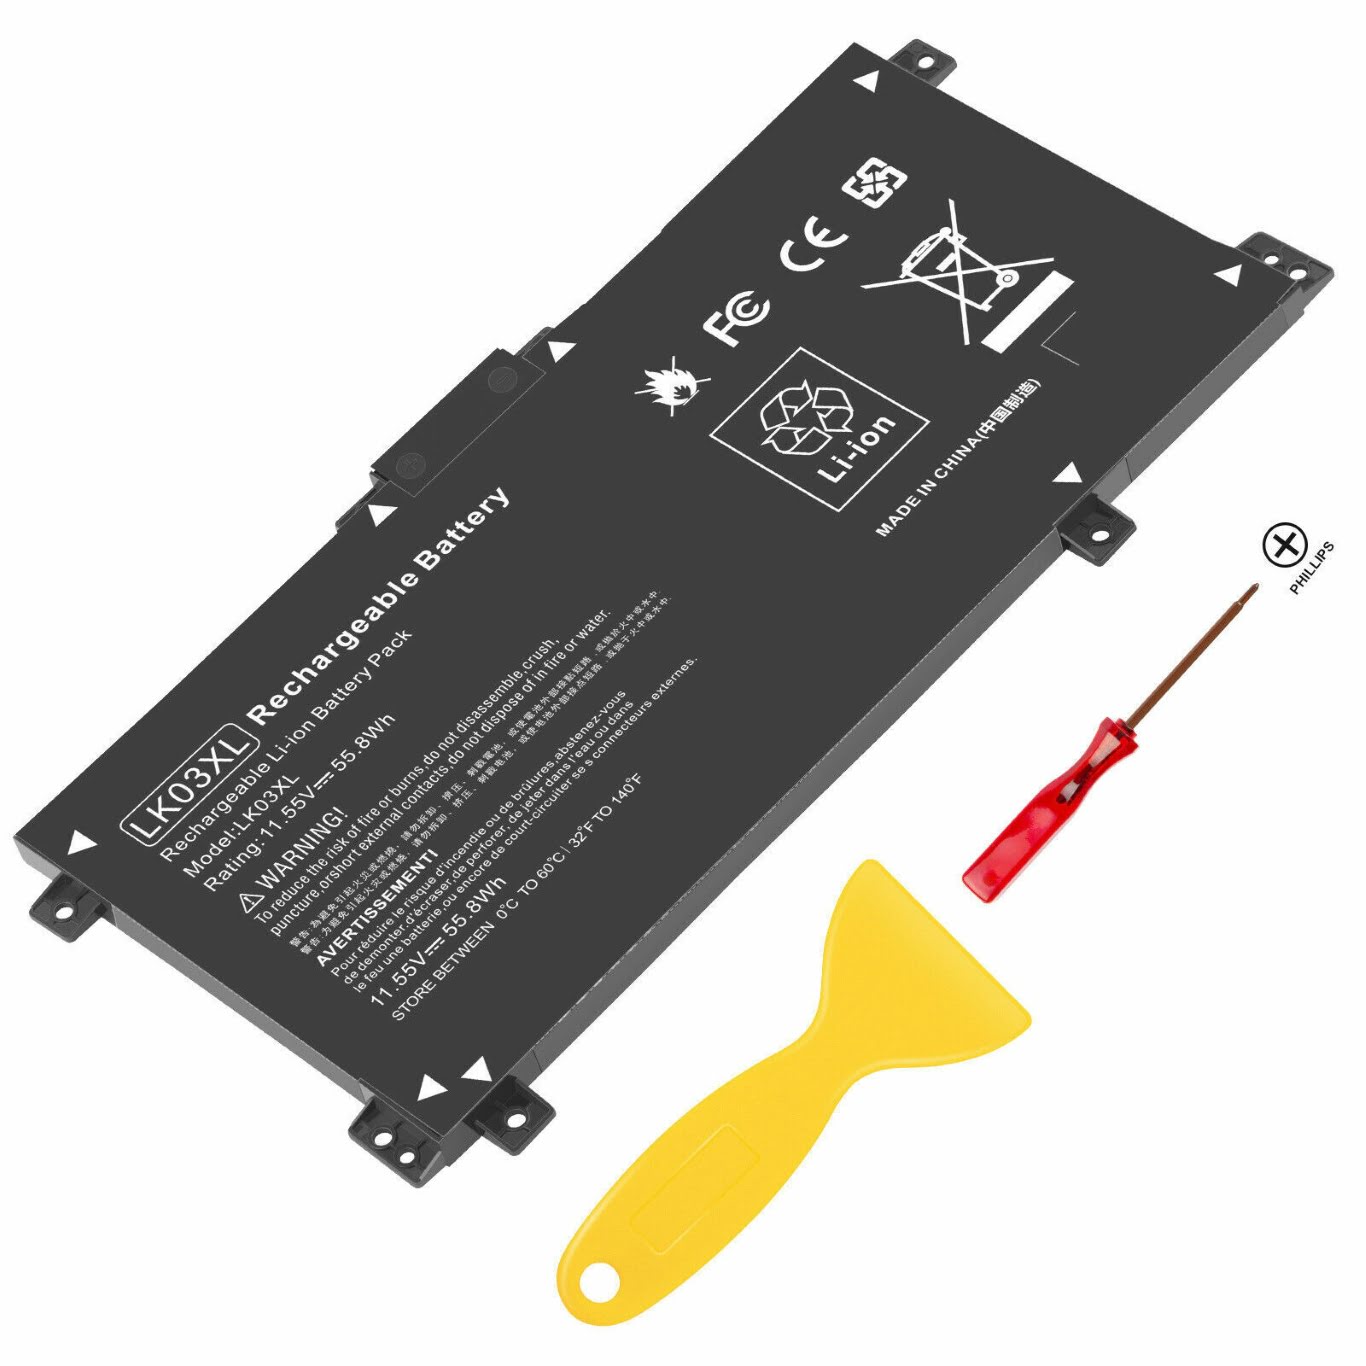 916368-421, 916368-541 replacement Laptop Battery for HP Envy X360, Envy X360 15-bp001tx, 3 cells, 11.55v, 55.8wh